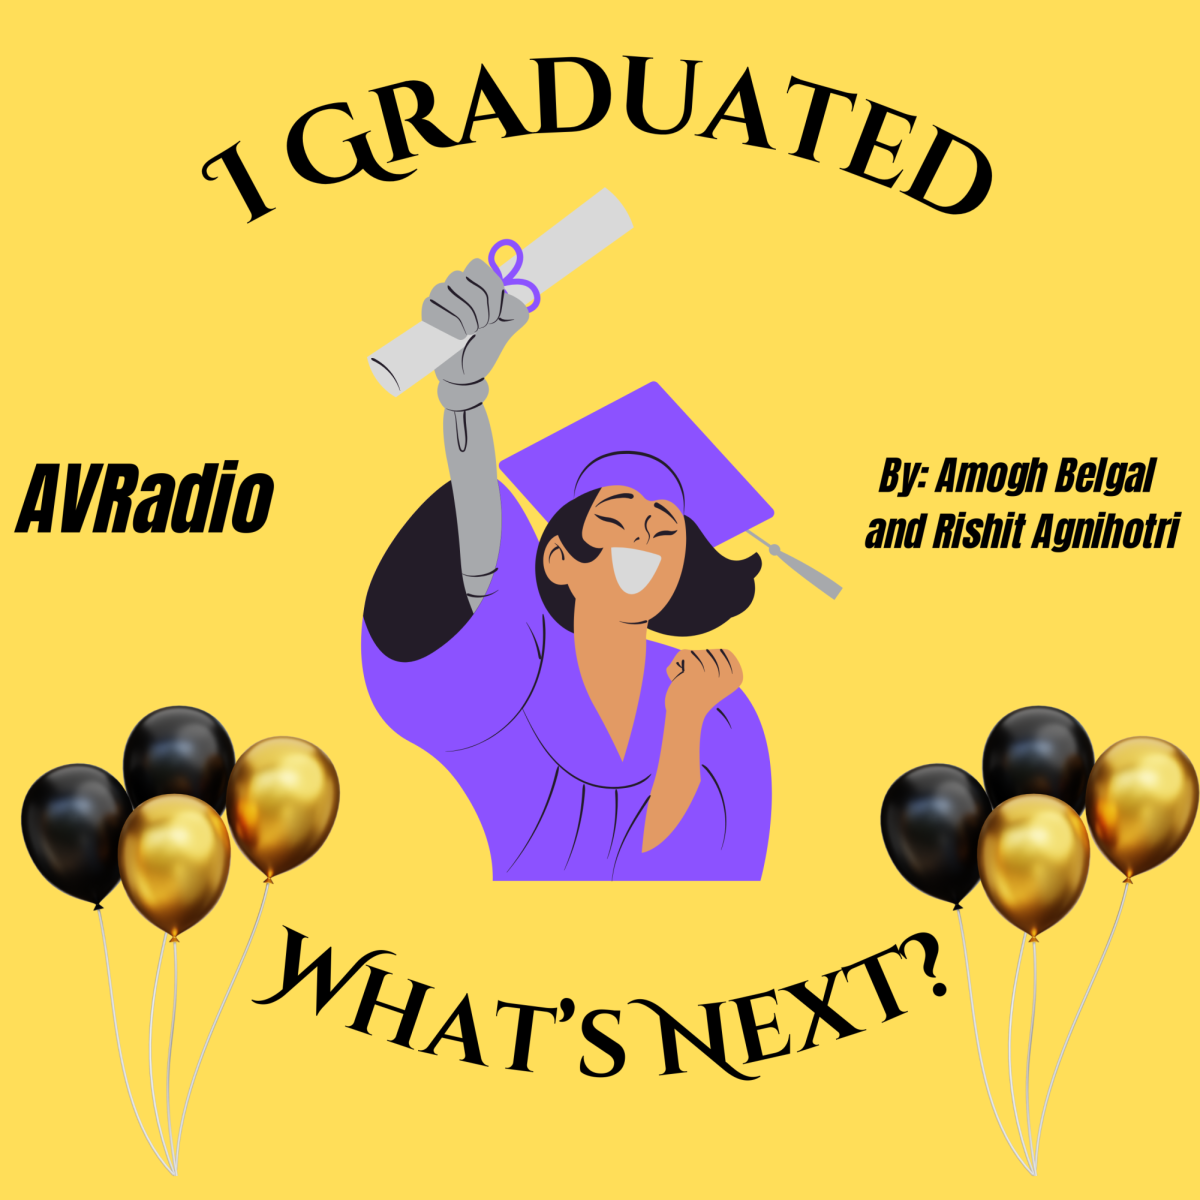 I graduated: what’s next?